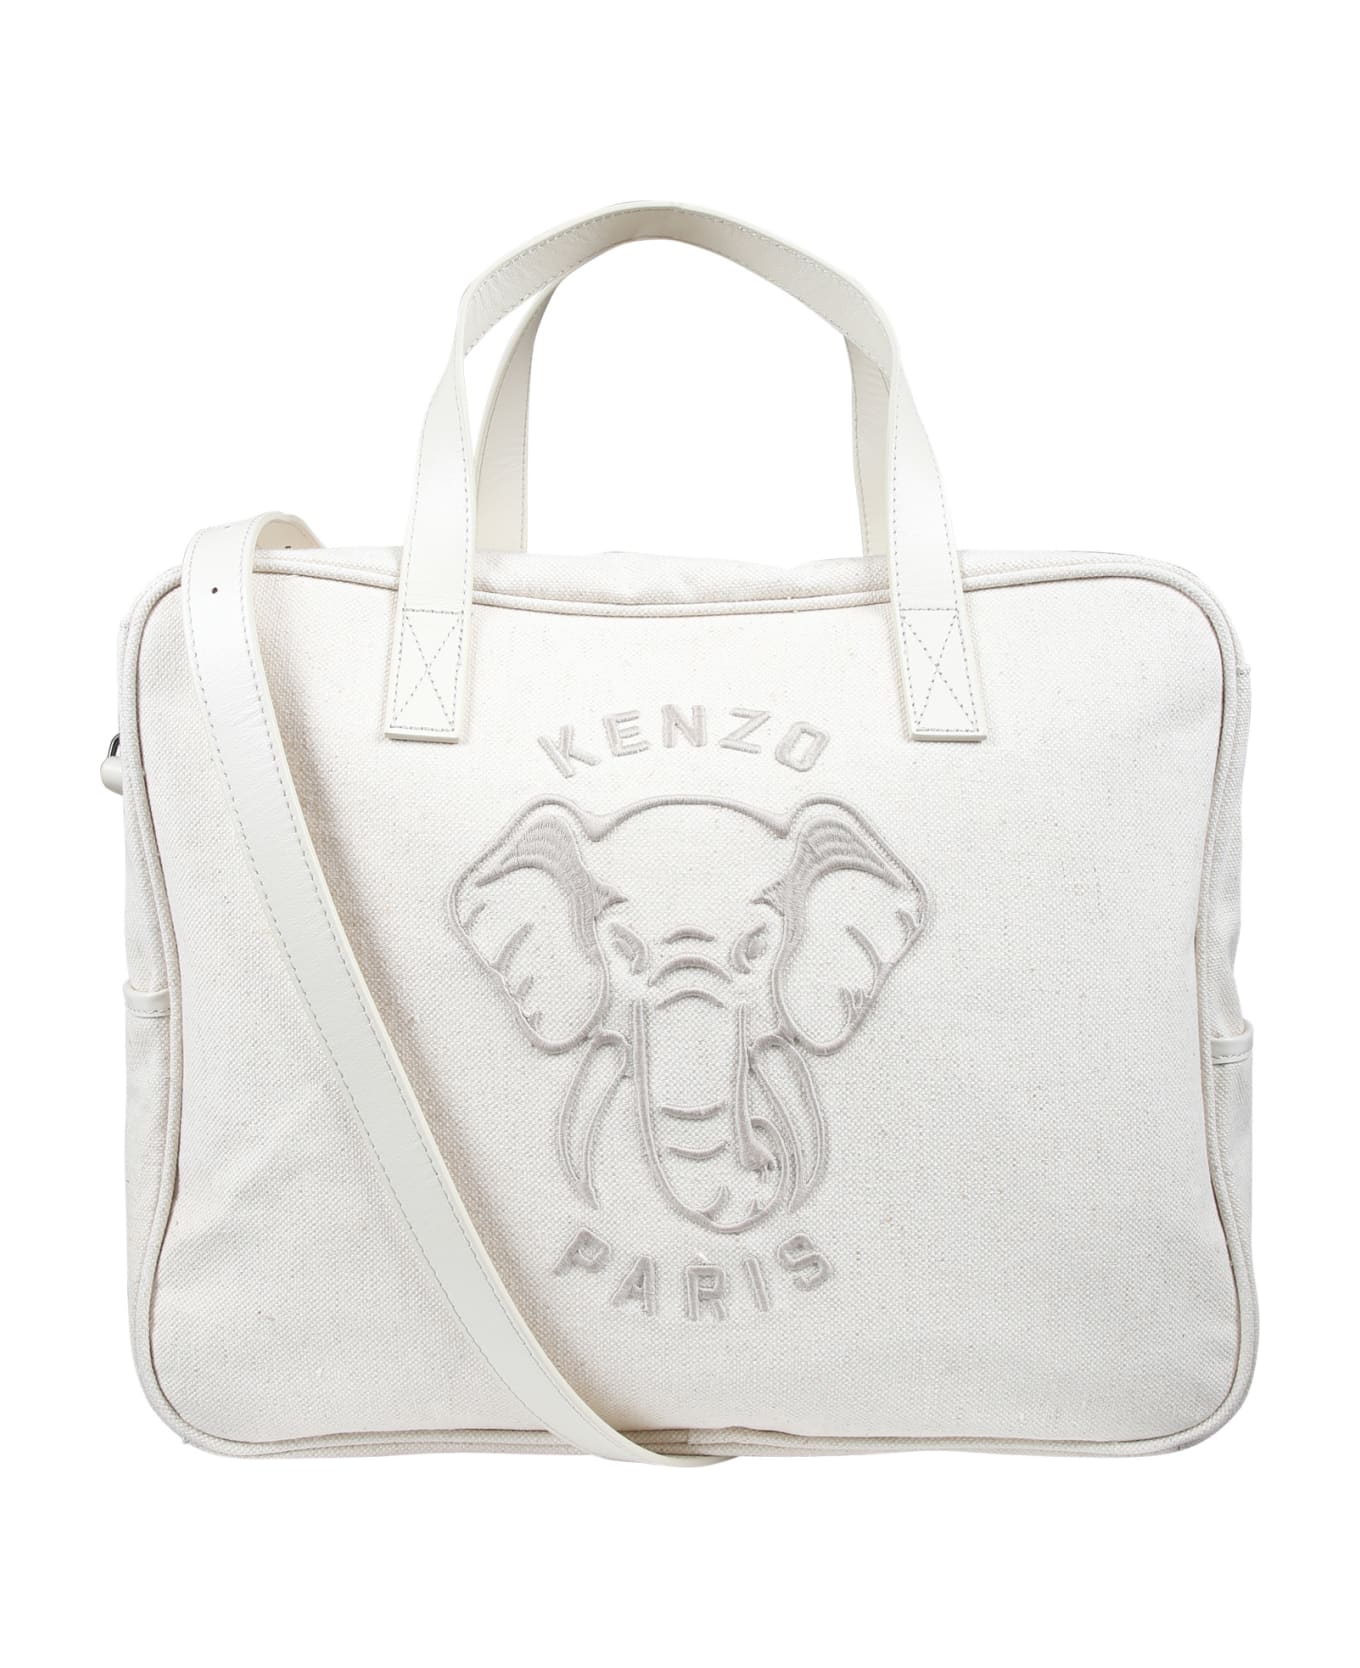 Kenzo Kids Beige Mother Bag For Babies With Logo And Elephant - Beige アクセサリー＆ギフト